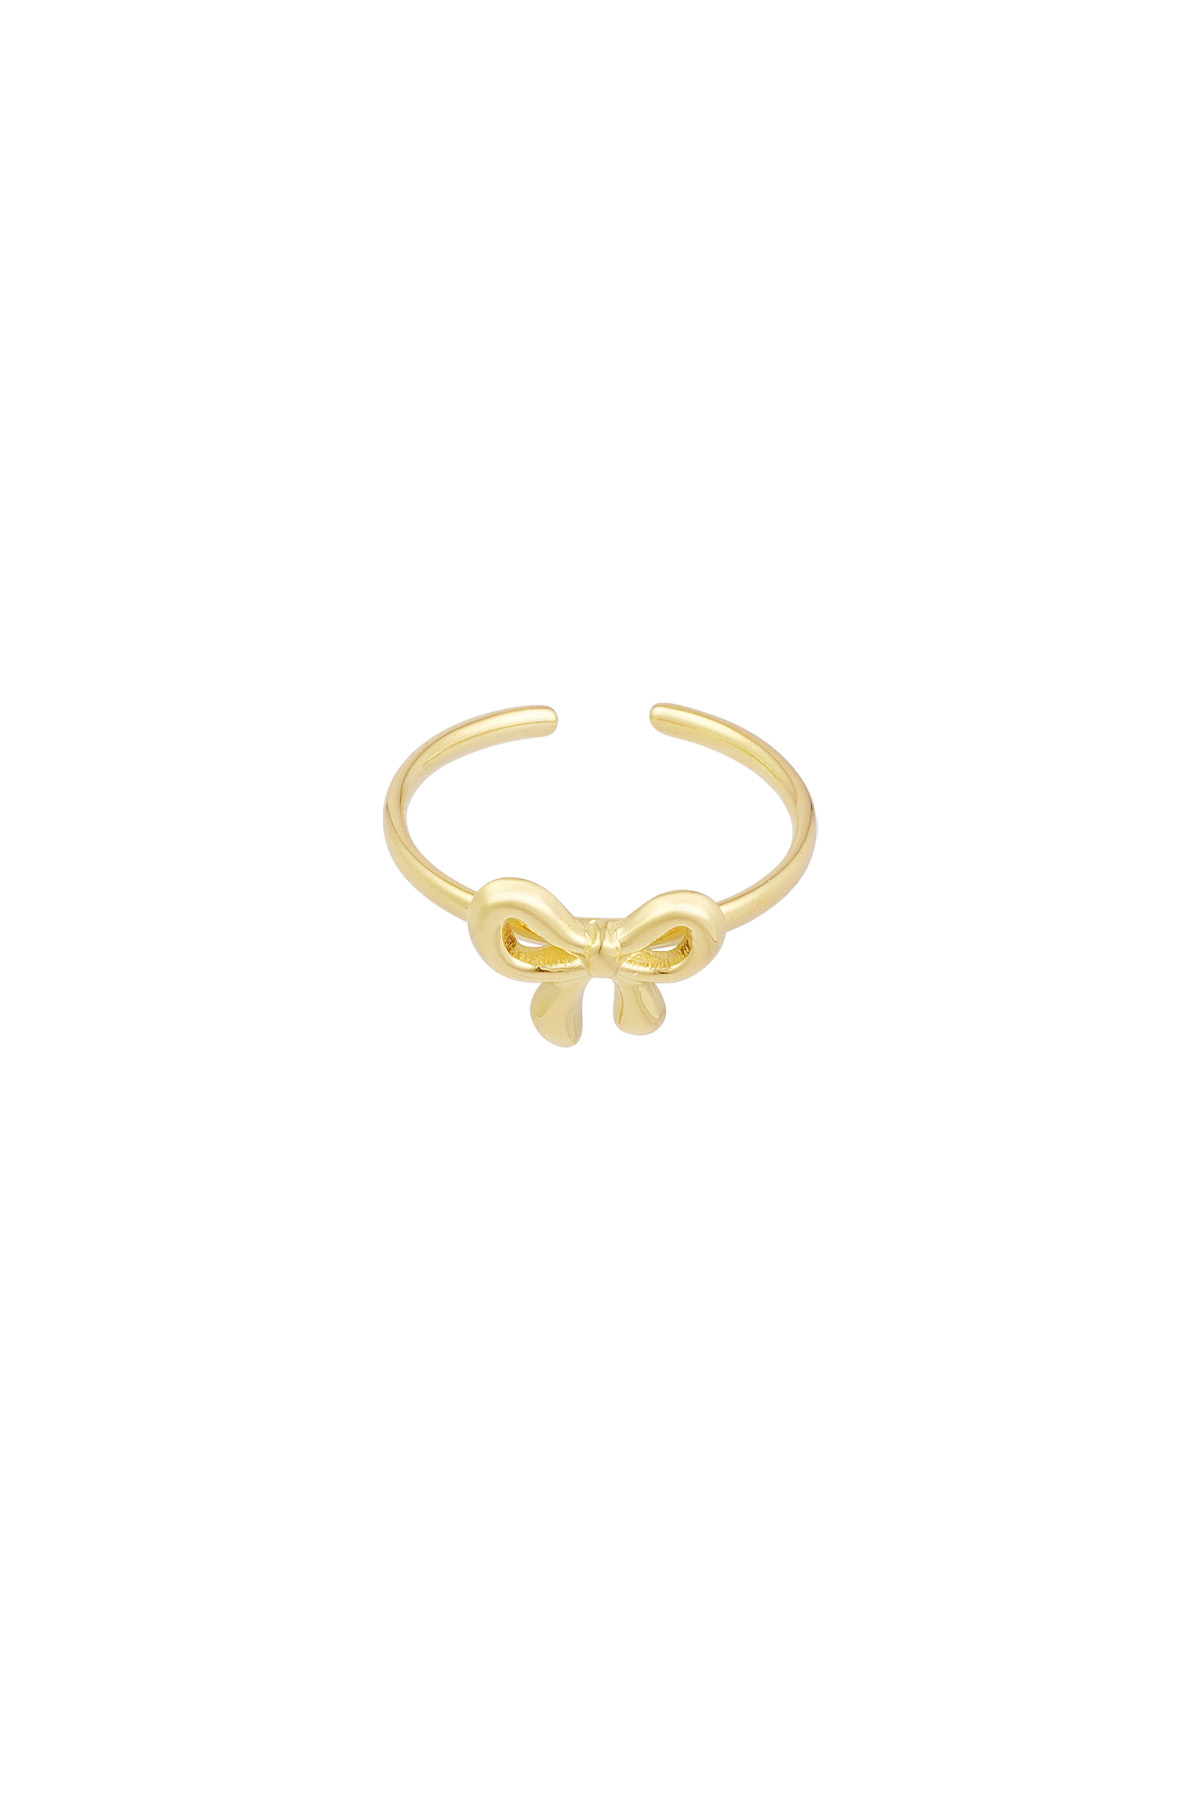 Ring bow life - gold  h5 